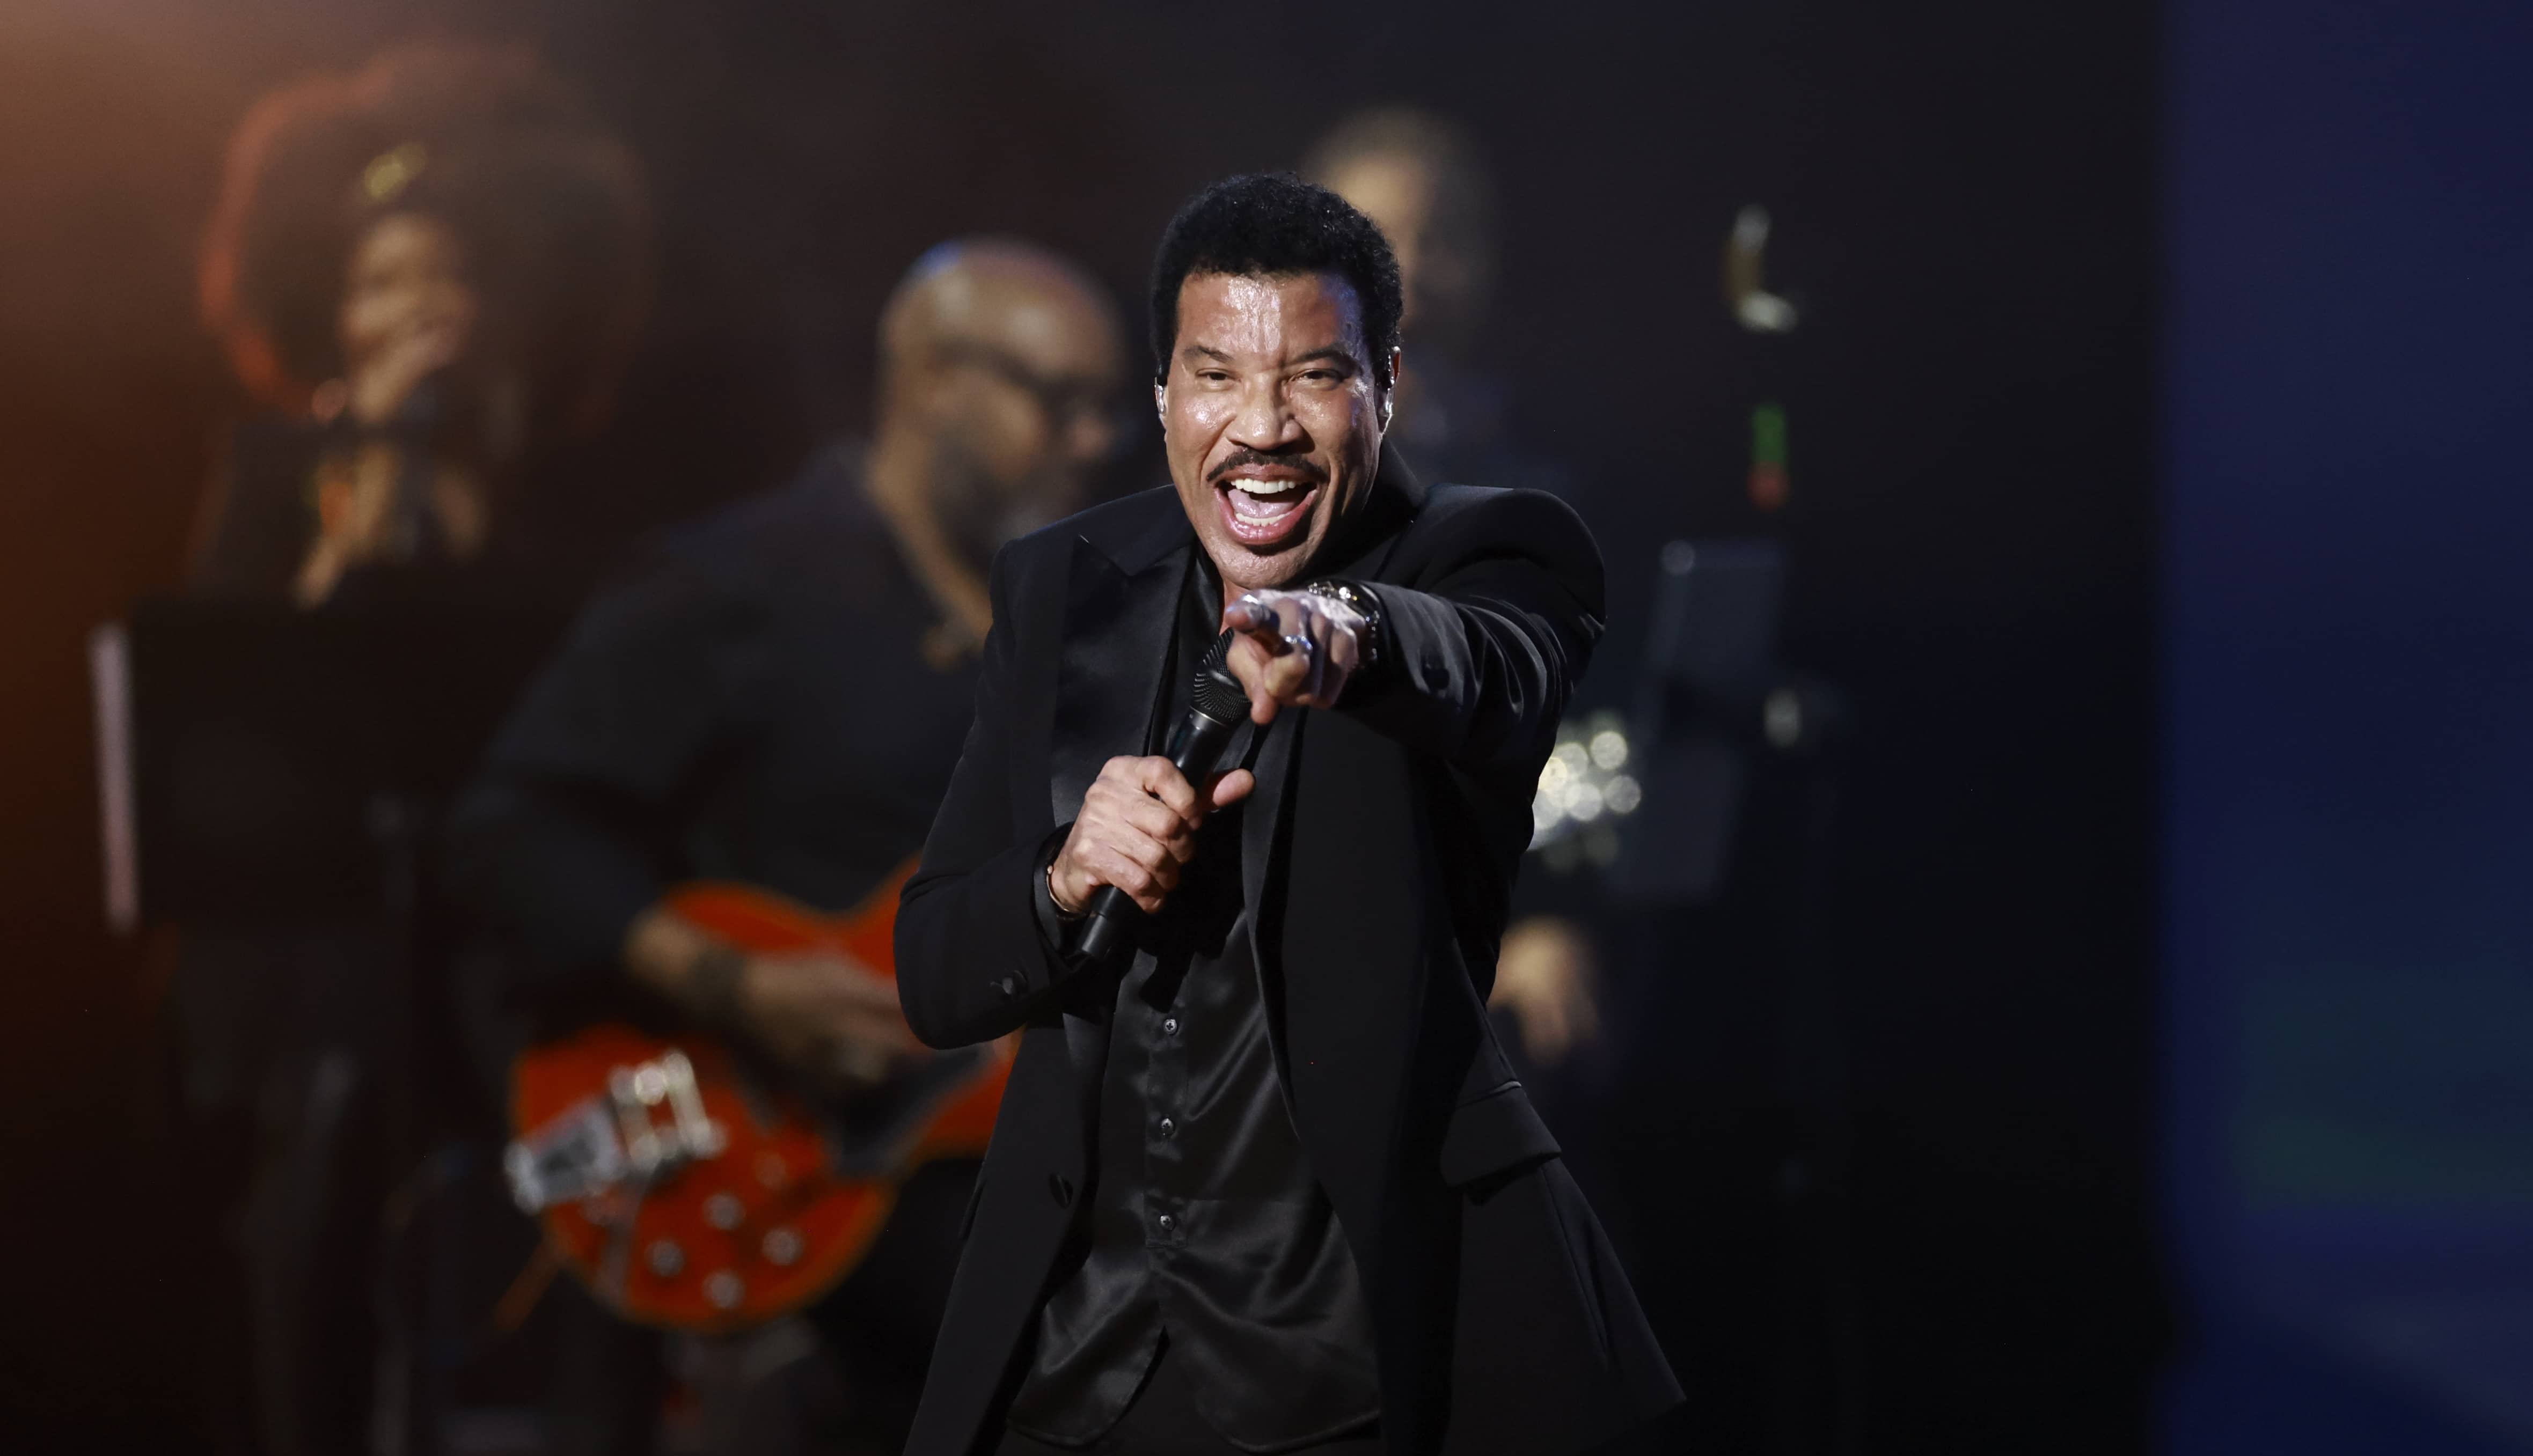 New Earth Wind & Fire + Lionel Richie Tour coming to Texas!